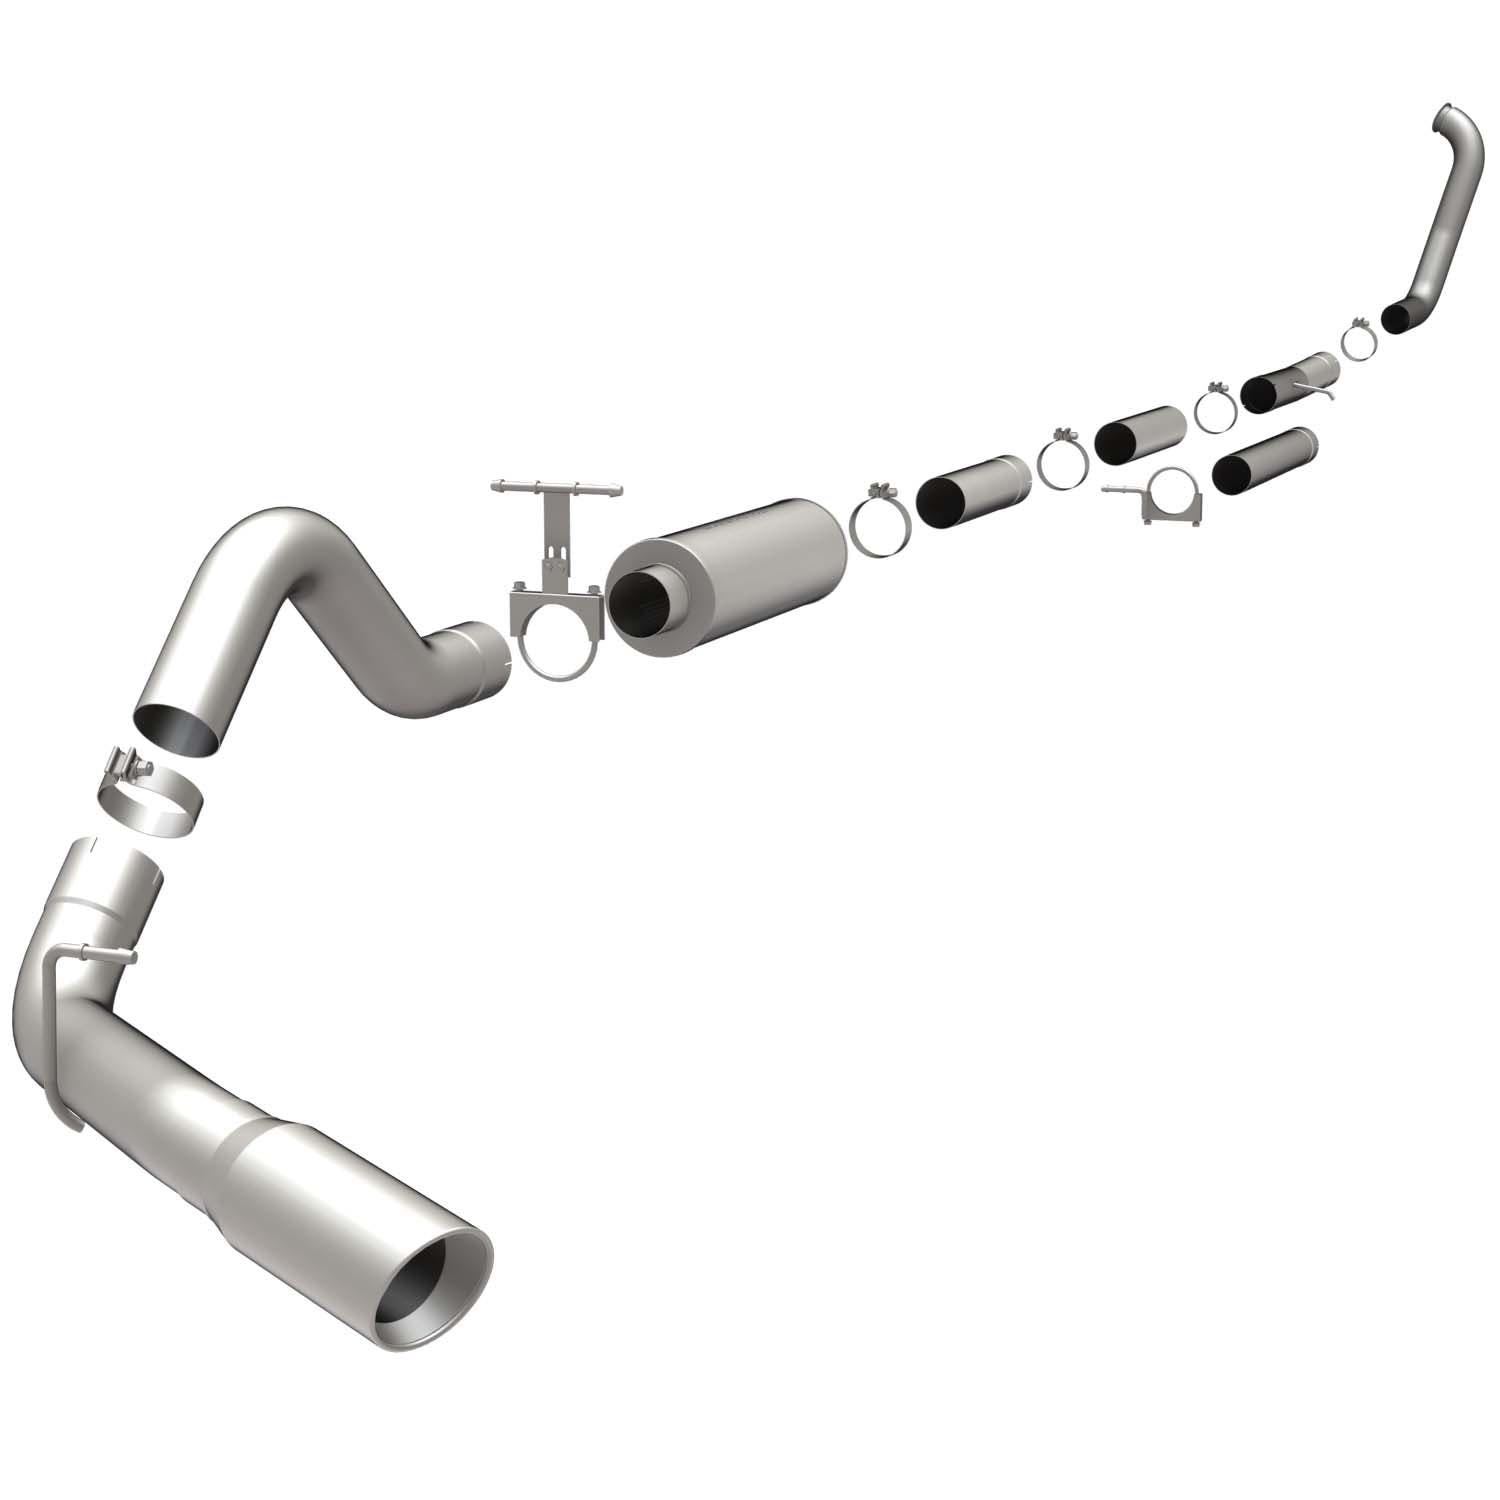 MagnaFlow Exhaust Products 15970 Sys TB 99-03 Ford F-Series 7.3L 4 inch